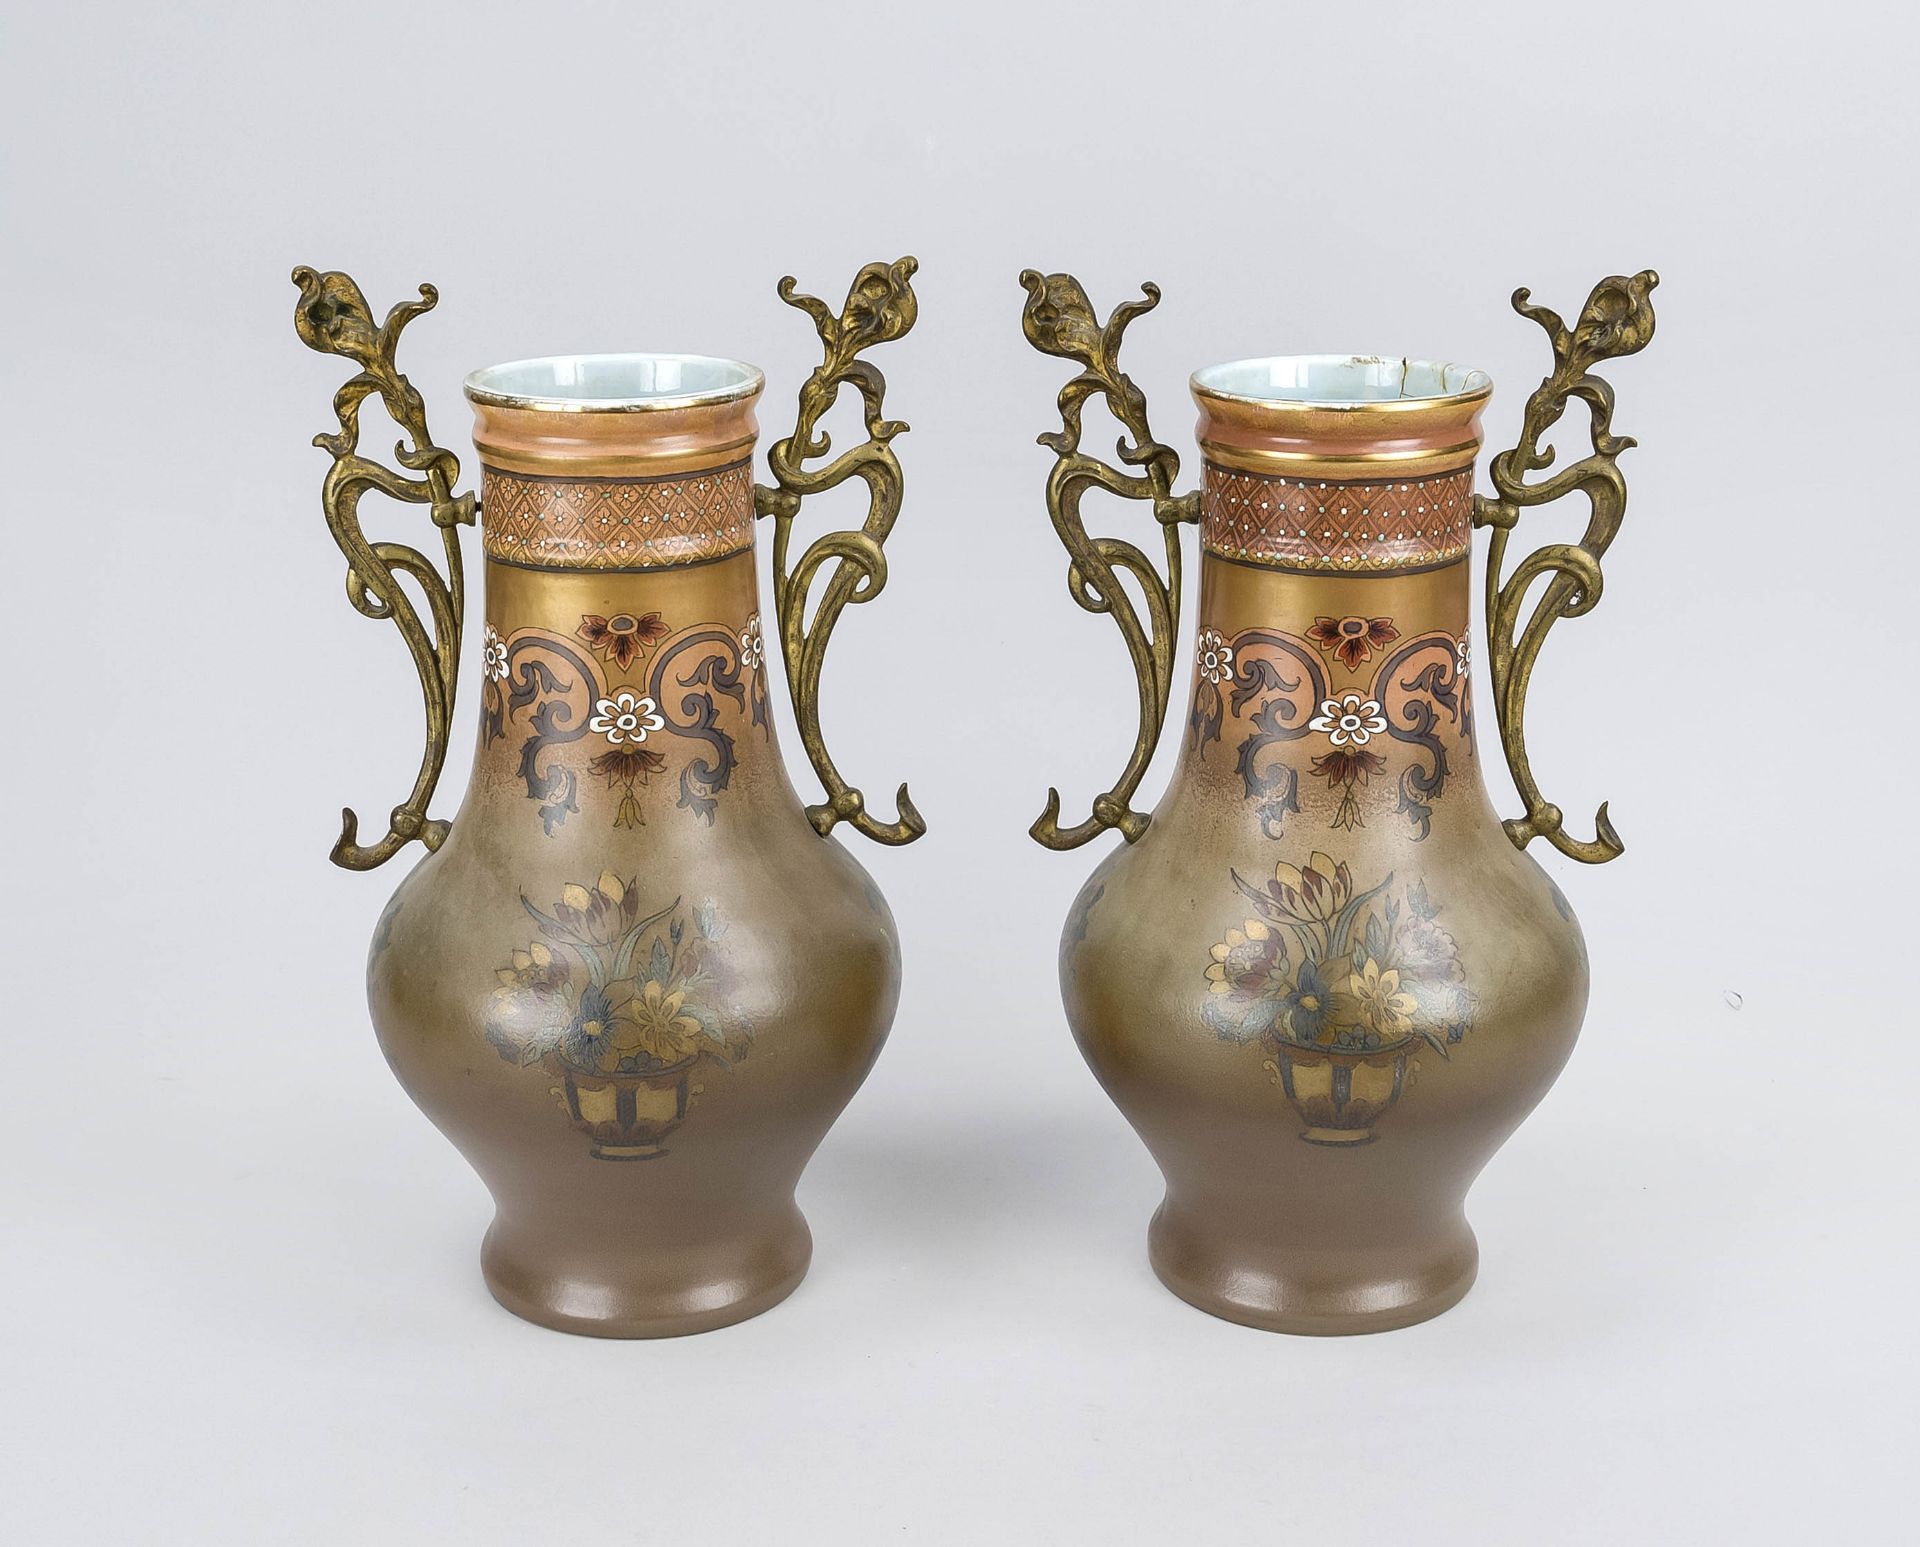 A pair of Art Nouveau vases, circa 1900, ceramic, floral painted, organic brass handles, one glued